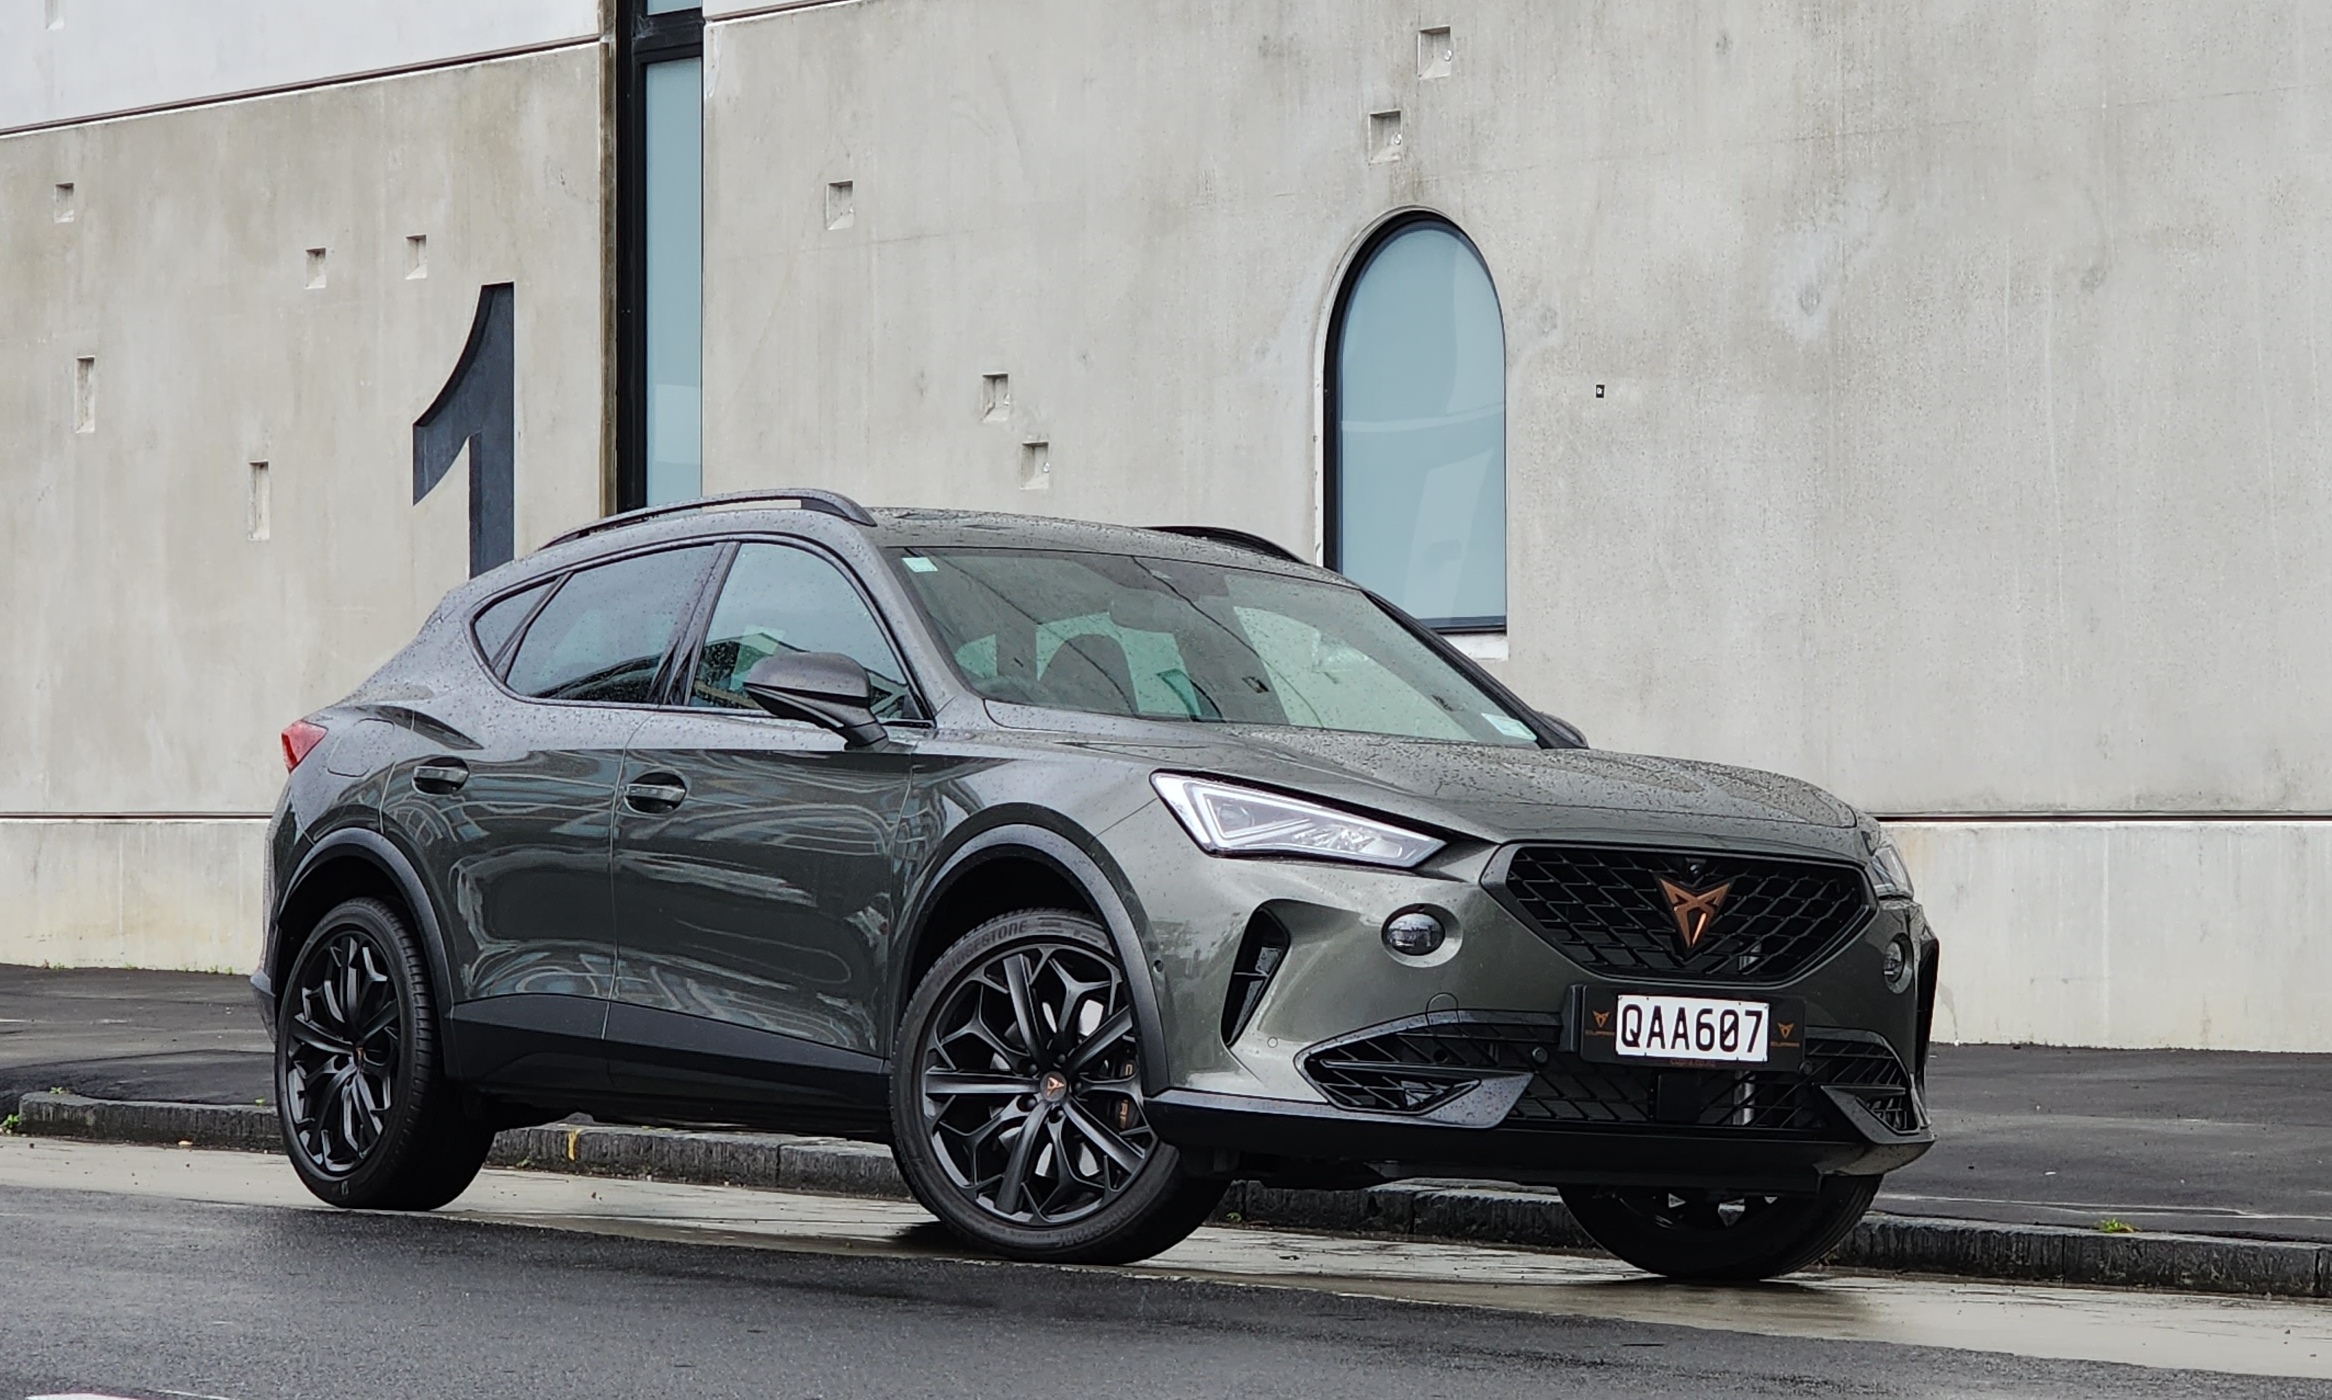 The Cupra Formentor is a new, bespoke Not-Seat SUV